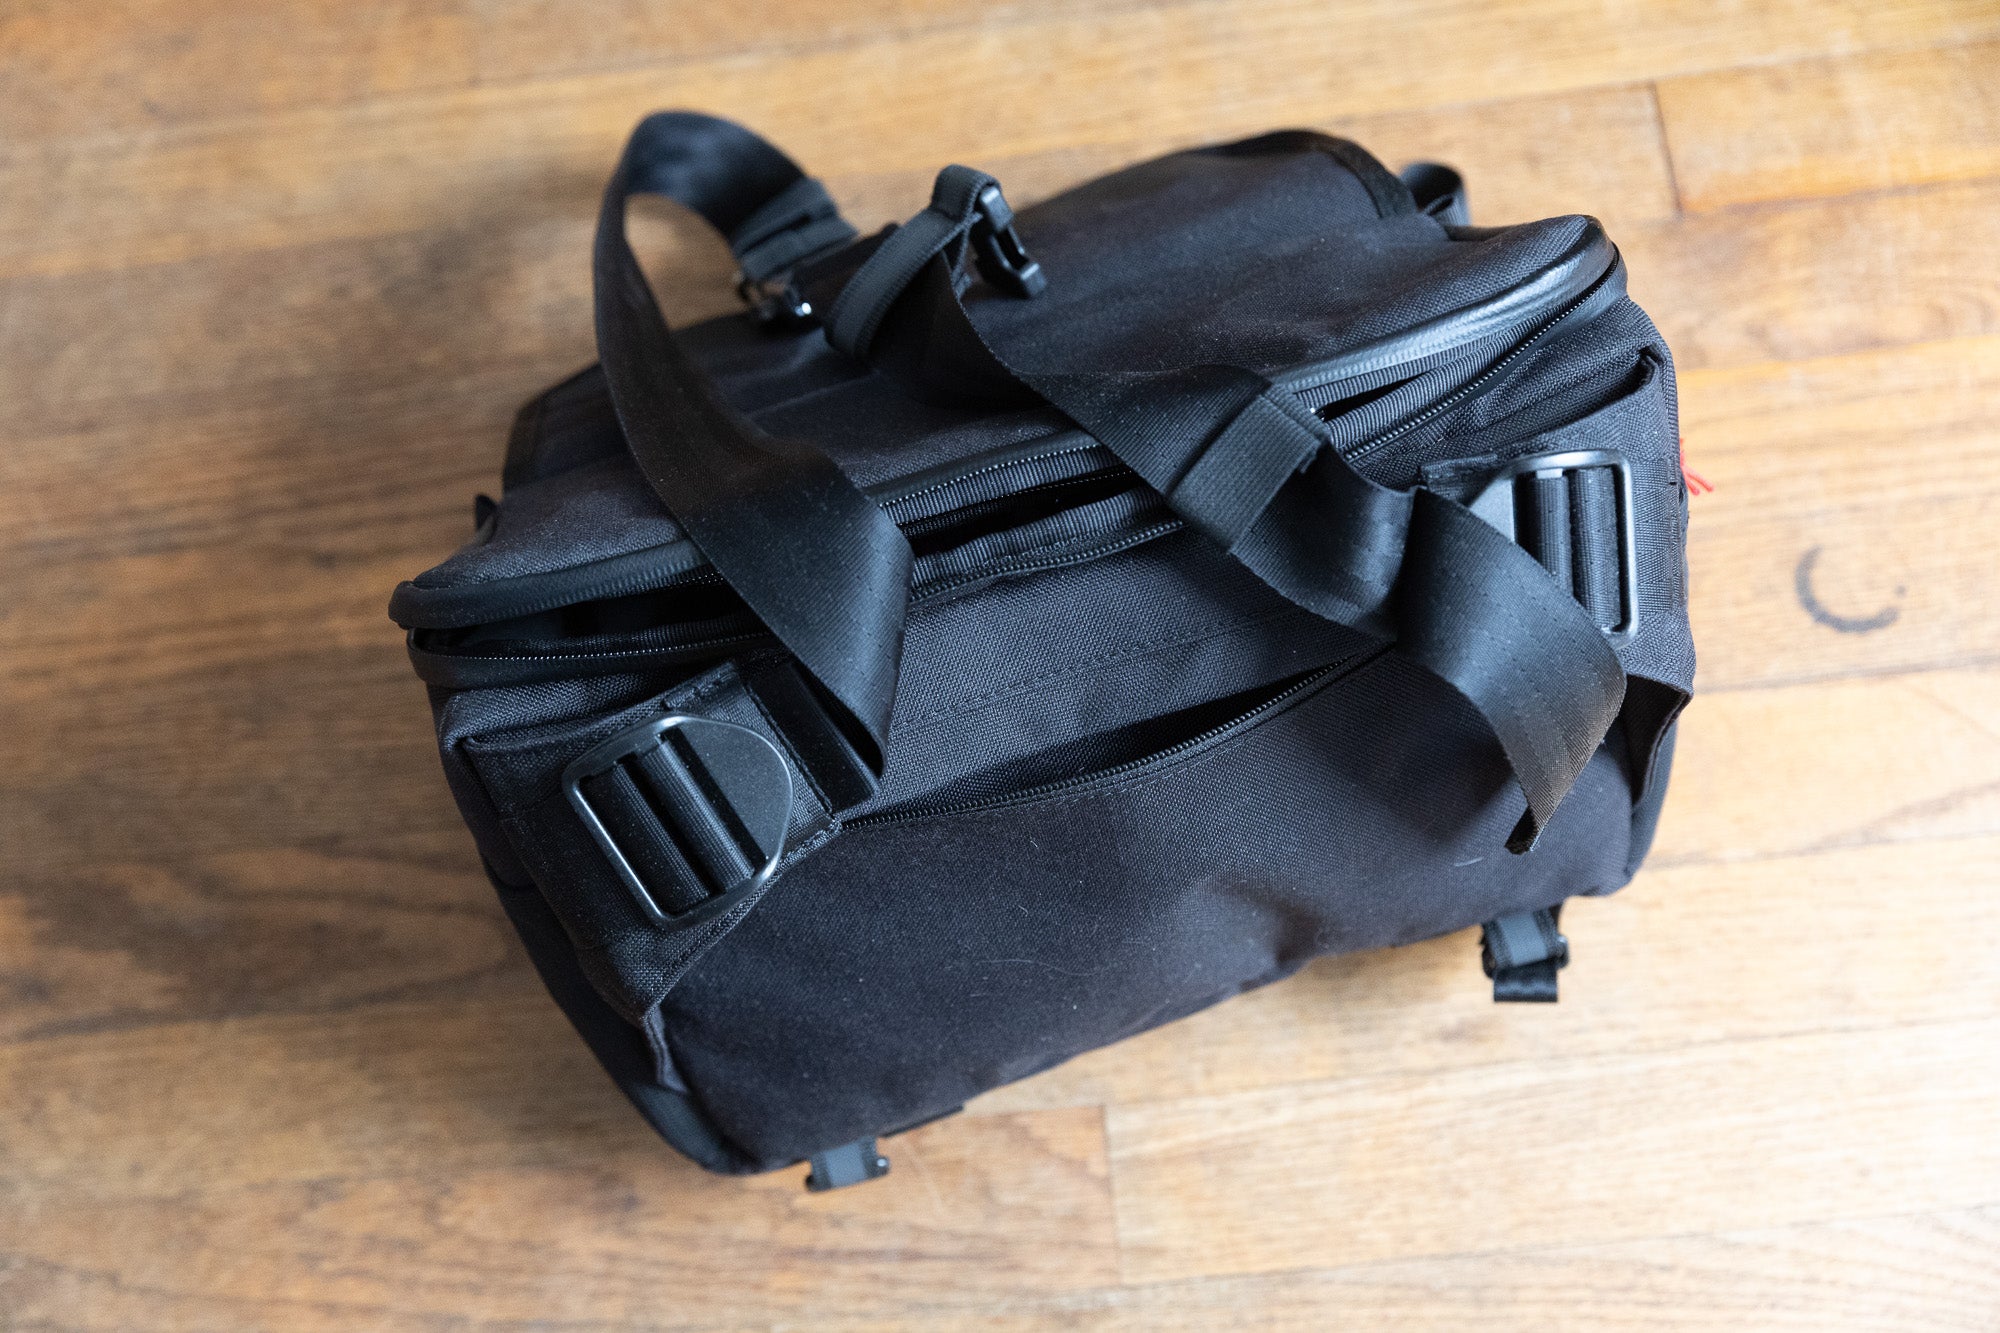 Chrome Niko 3.0 camera sling bag review: The back pocket is open